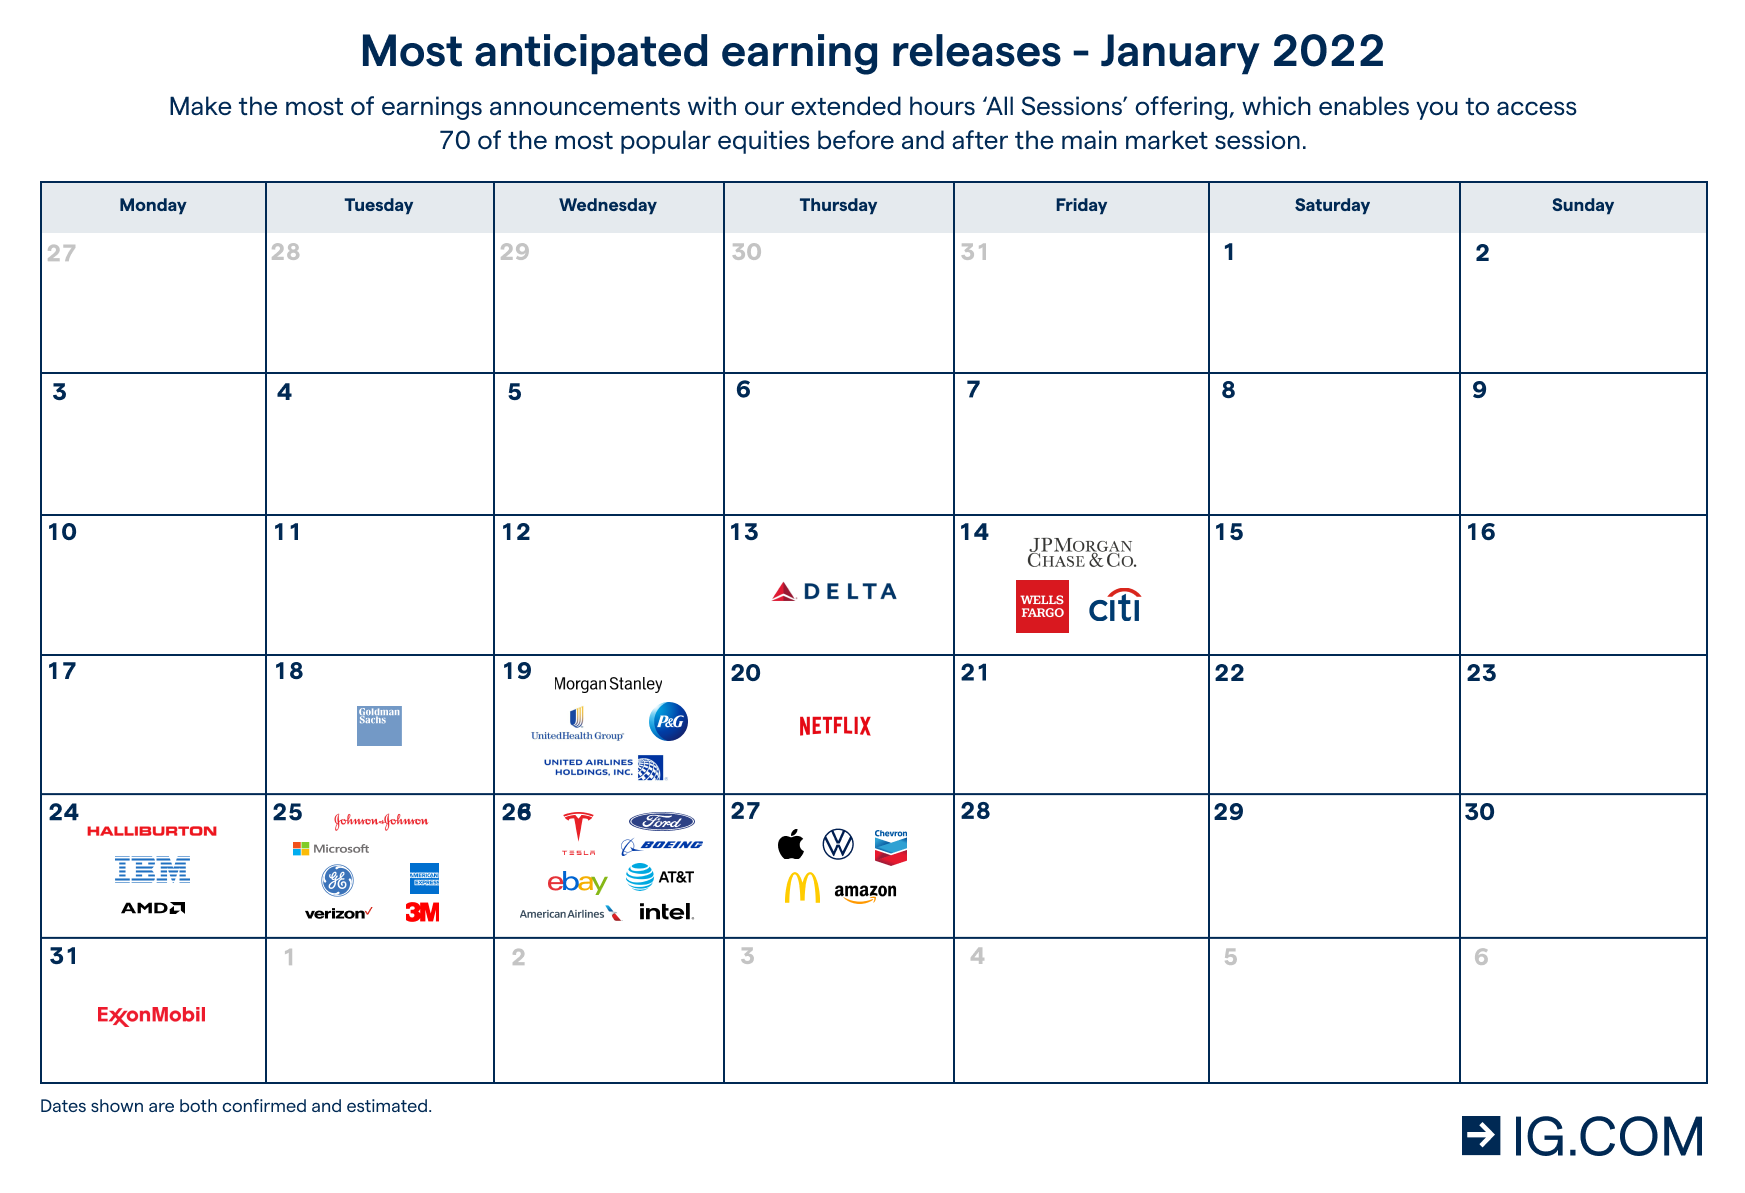 Most anticipated earnings release